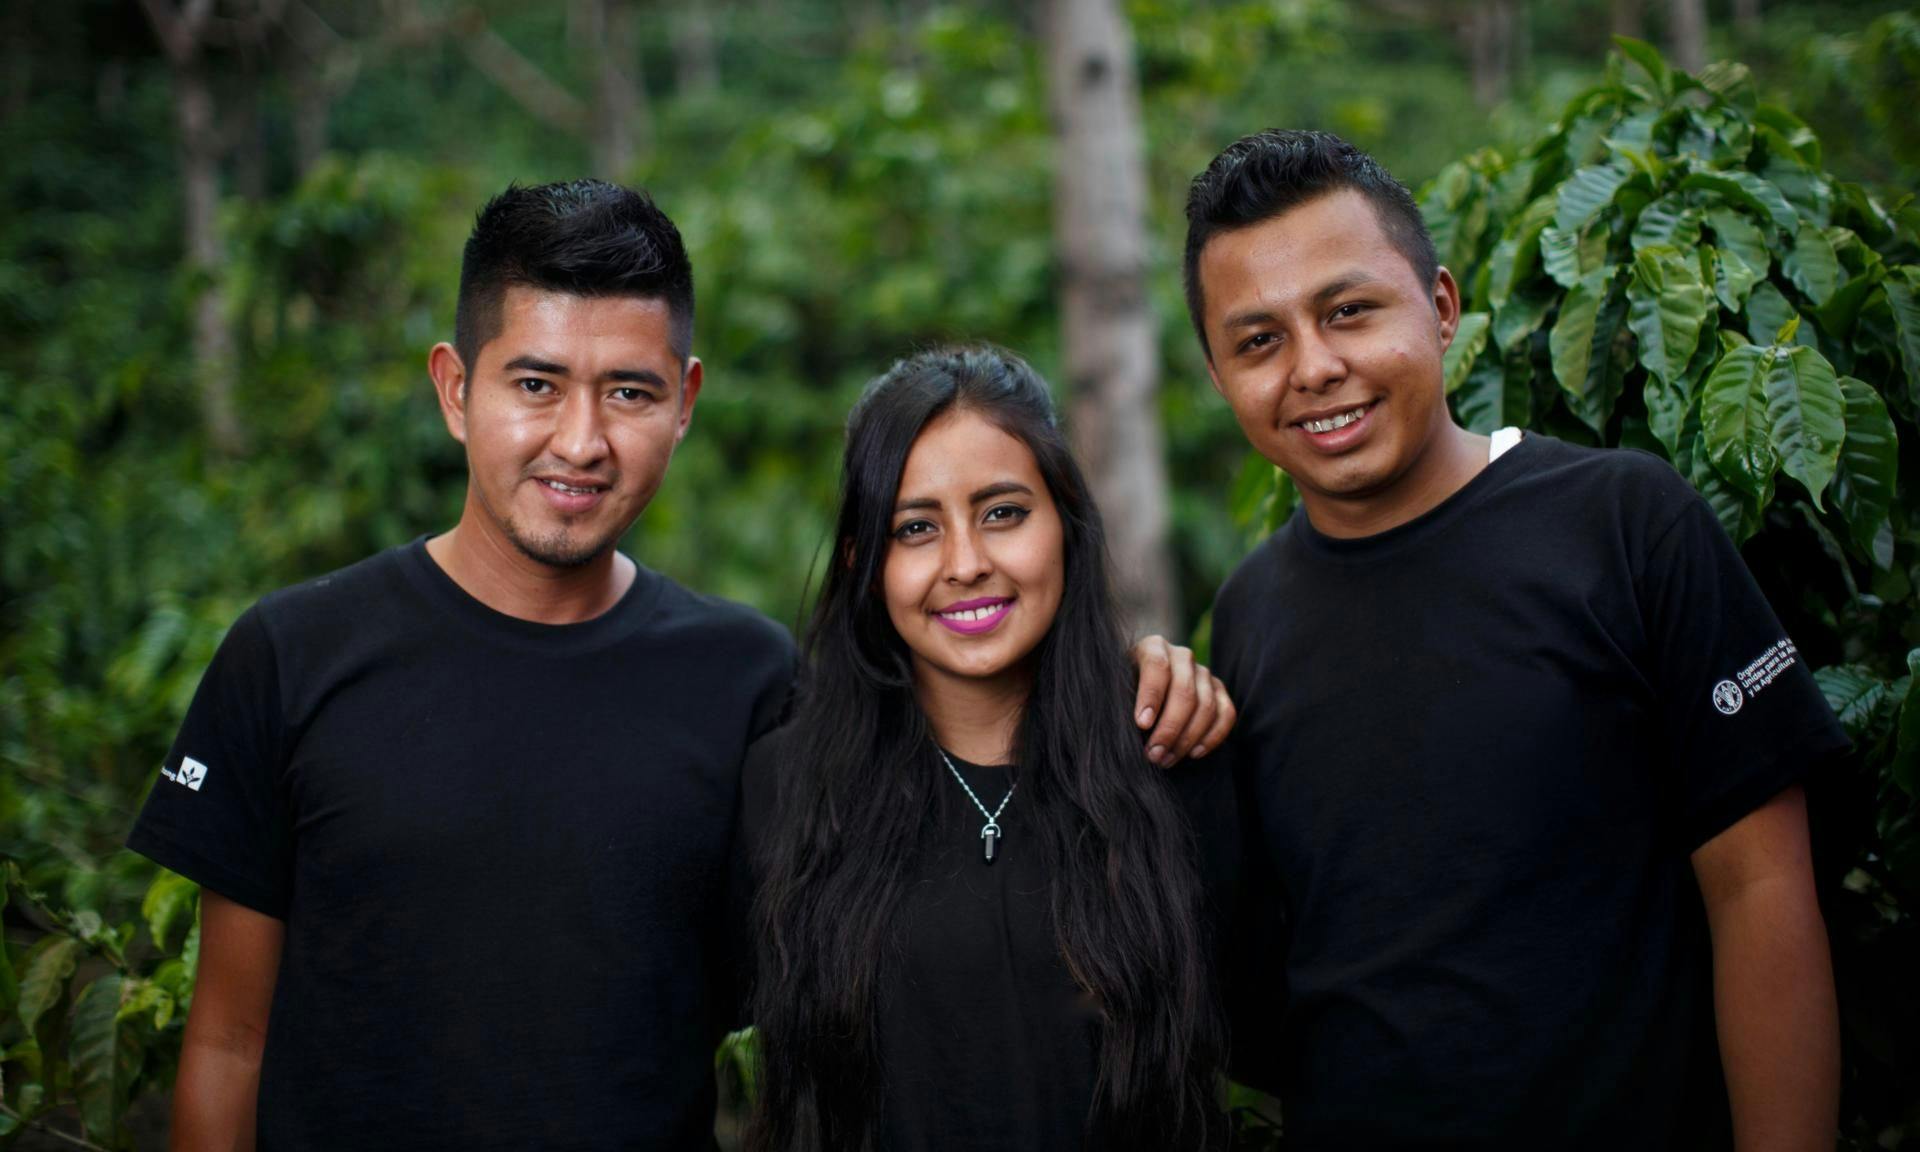 Alejandro and two other youth members